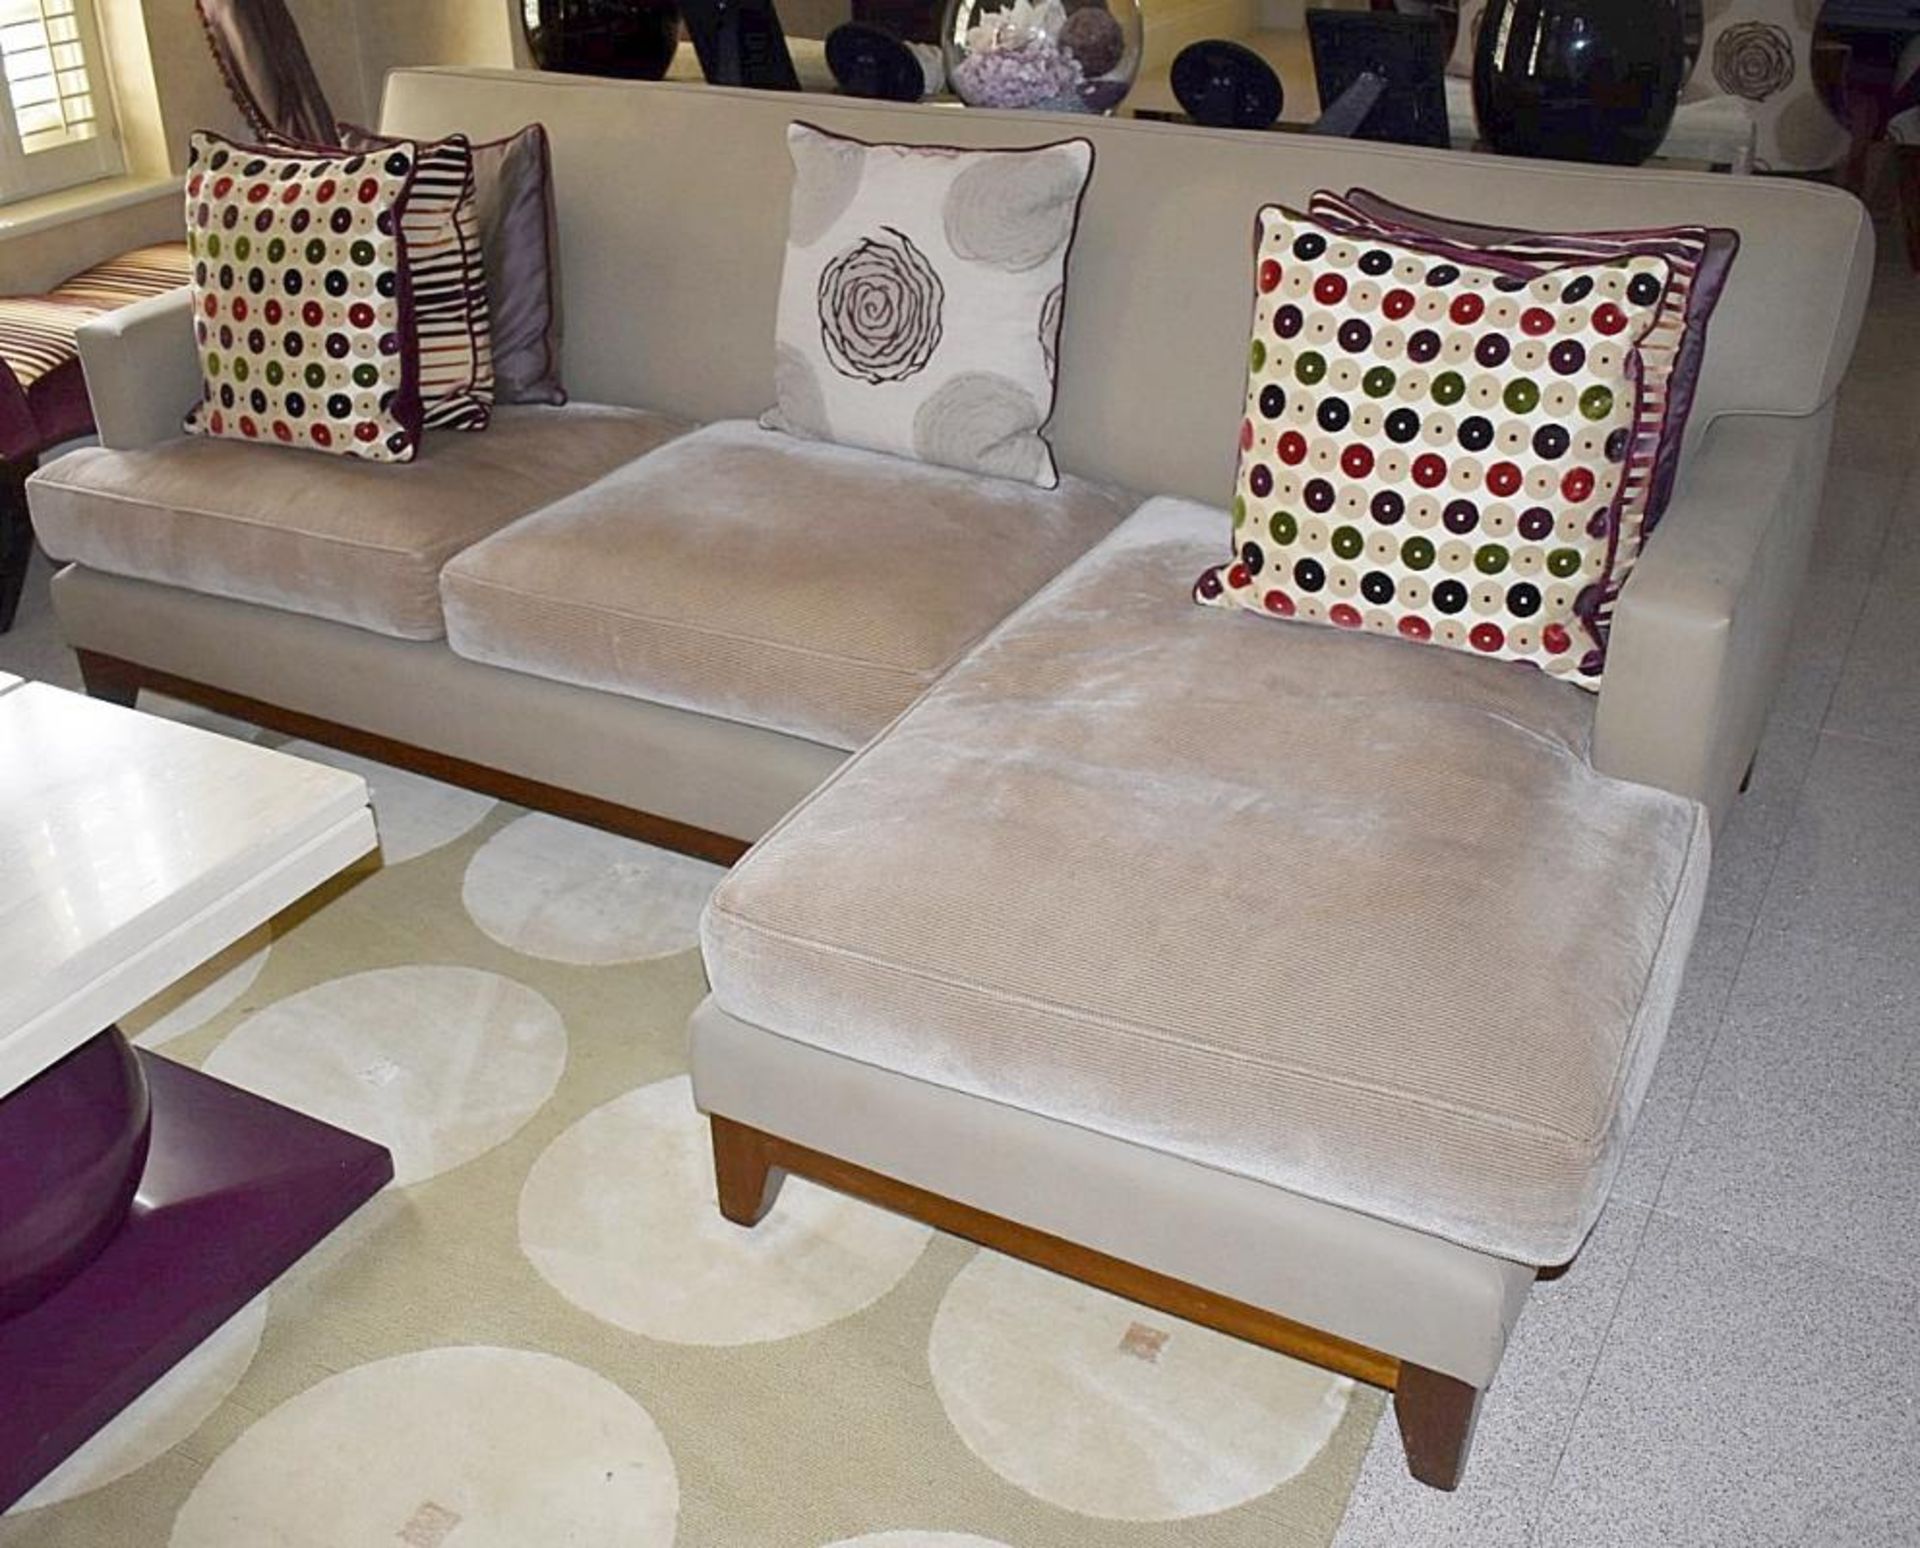 1 x Right-Hand Corner Sofa Upholstered In Light Cream Leather And Chenille Fabrics - RRP £15,000 - Image 2 of 6